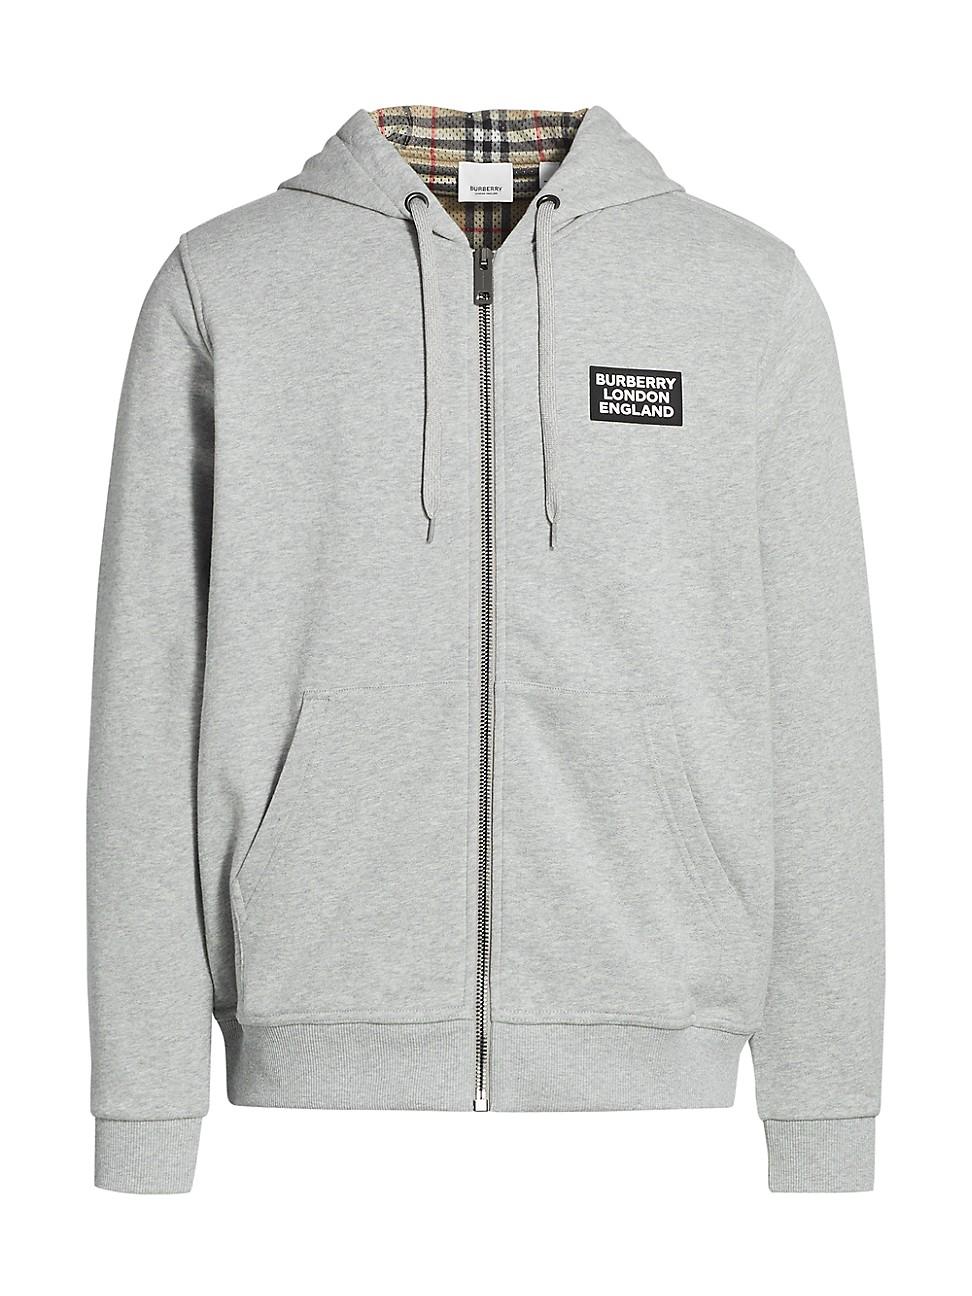 Burberry Hove Check Zip Hoodie in Gray for Men | Lyst